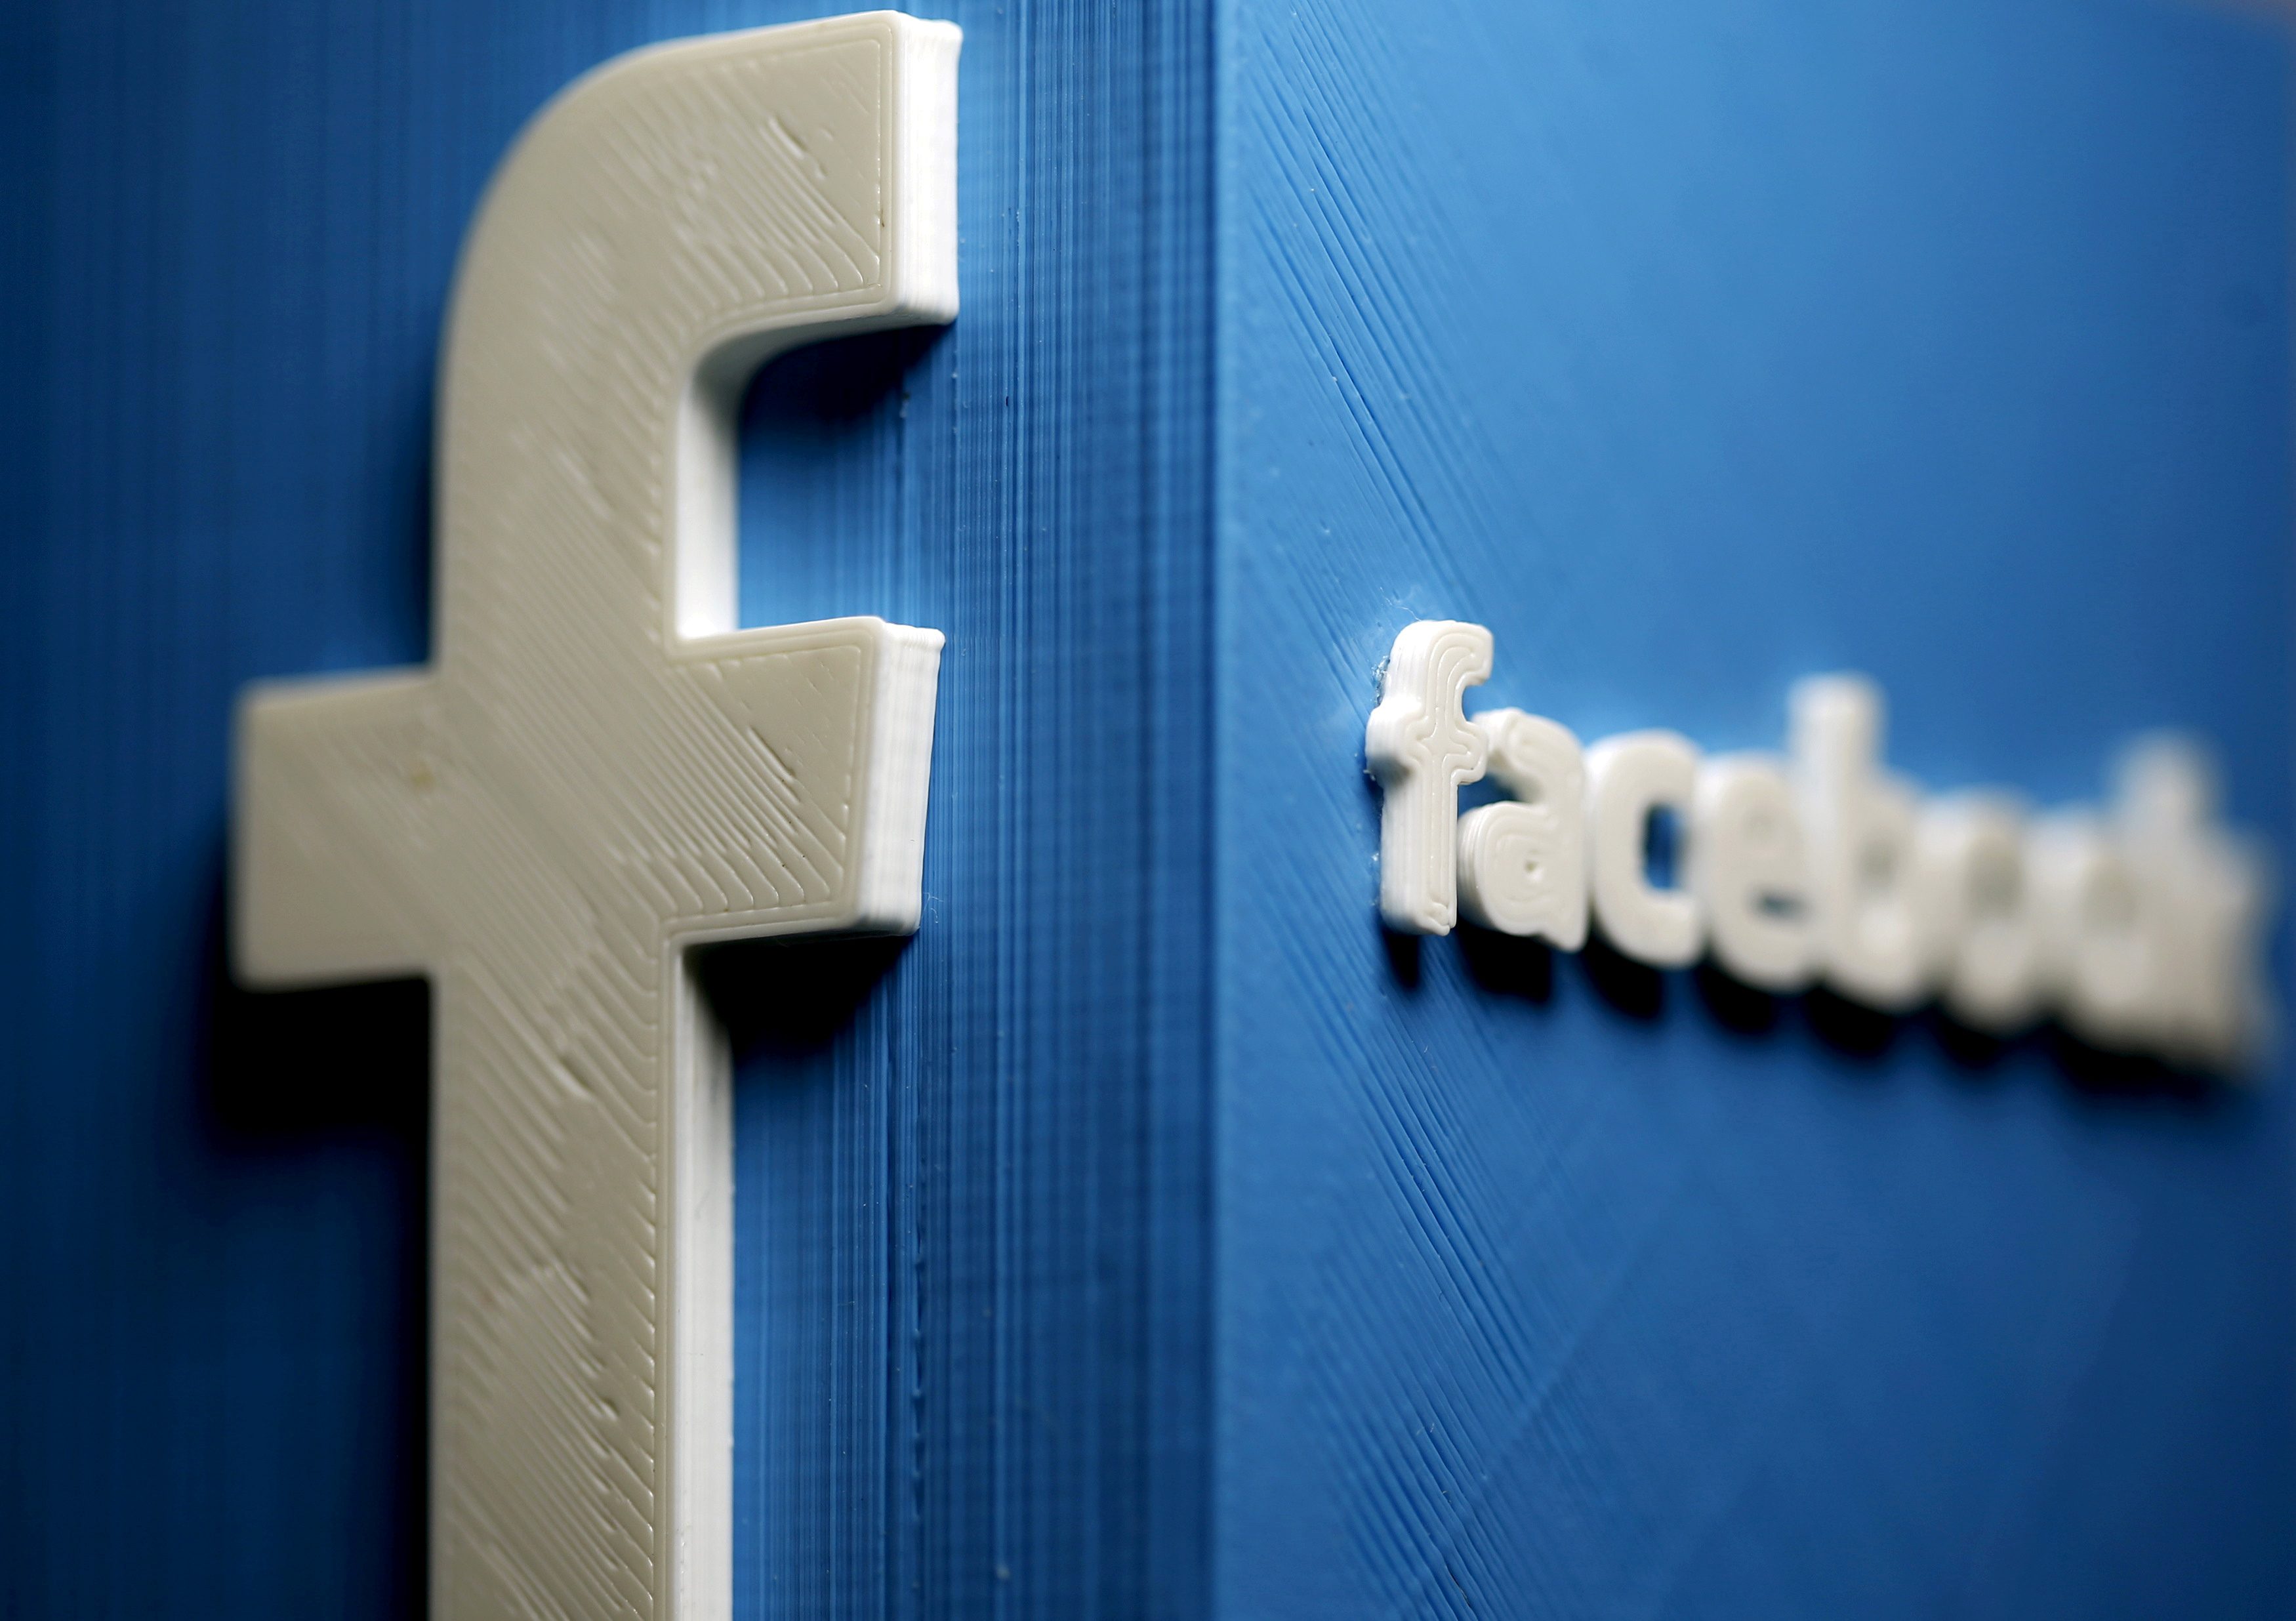 Facebook says it should not be blamed for US failing to meet vaccine goals